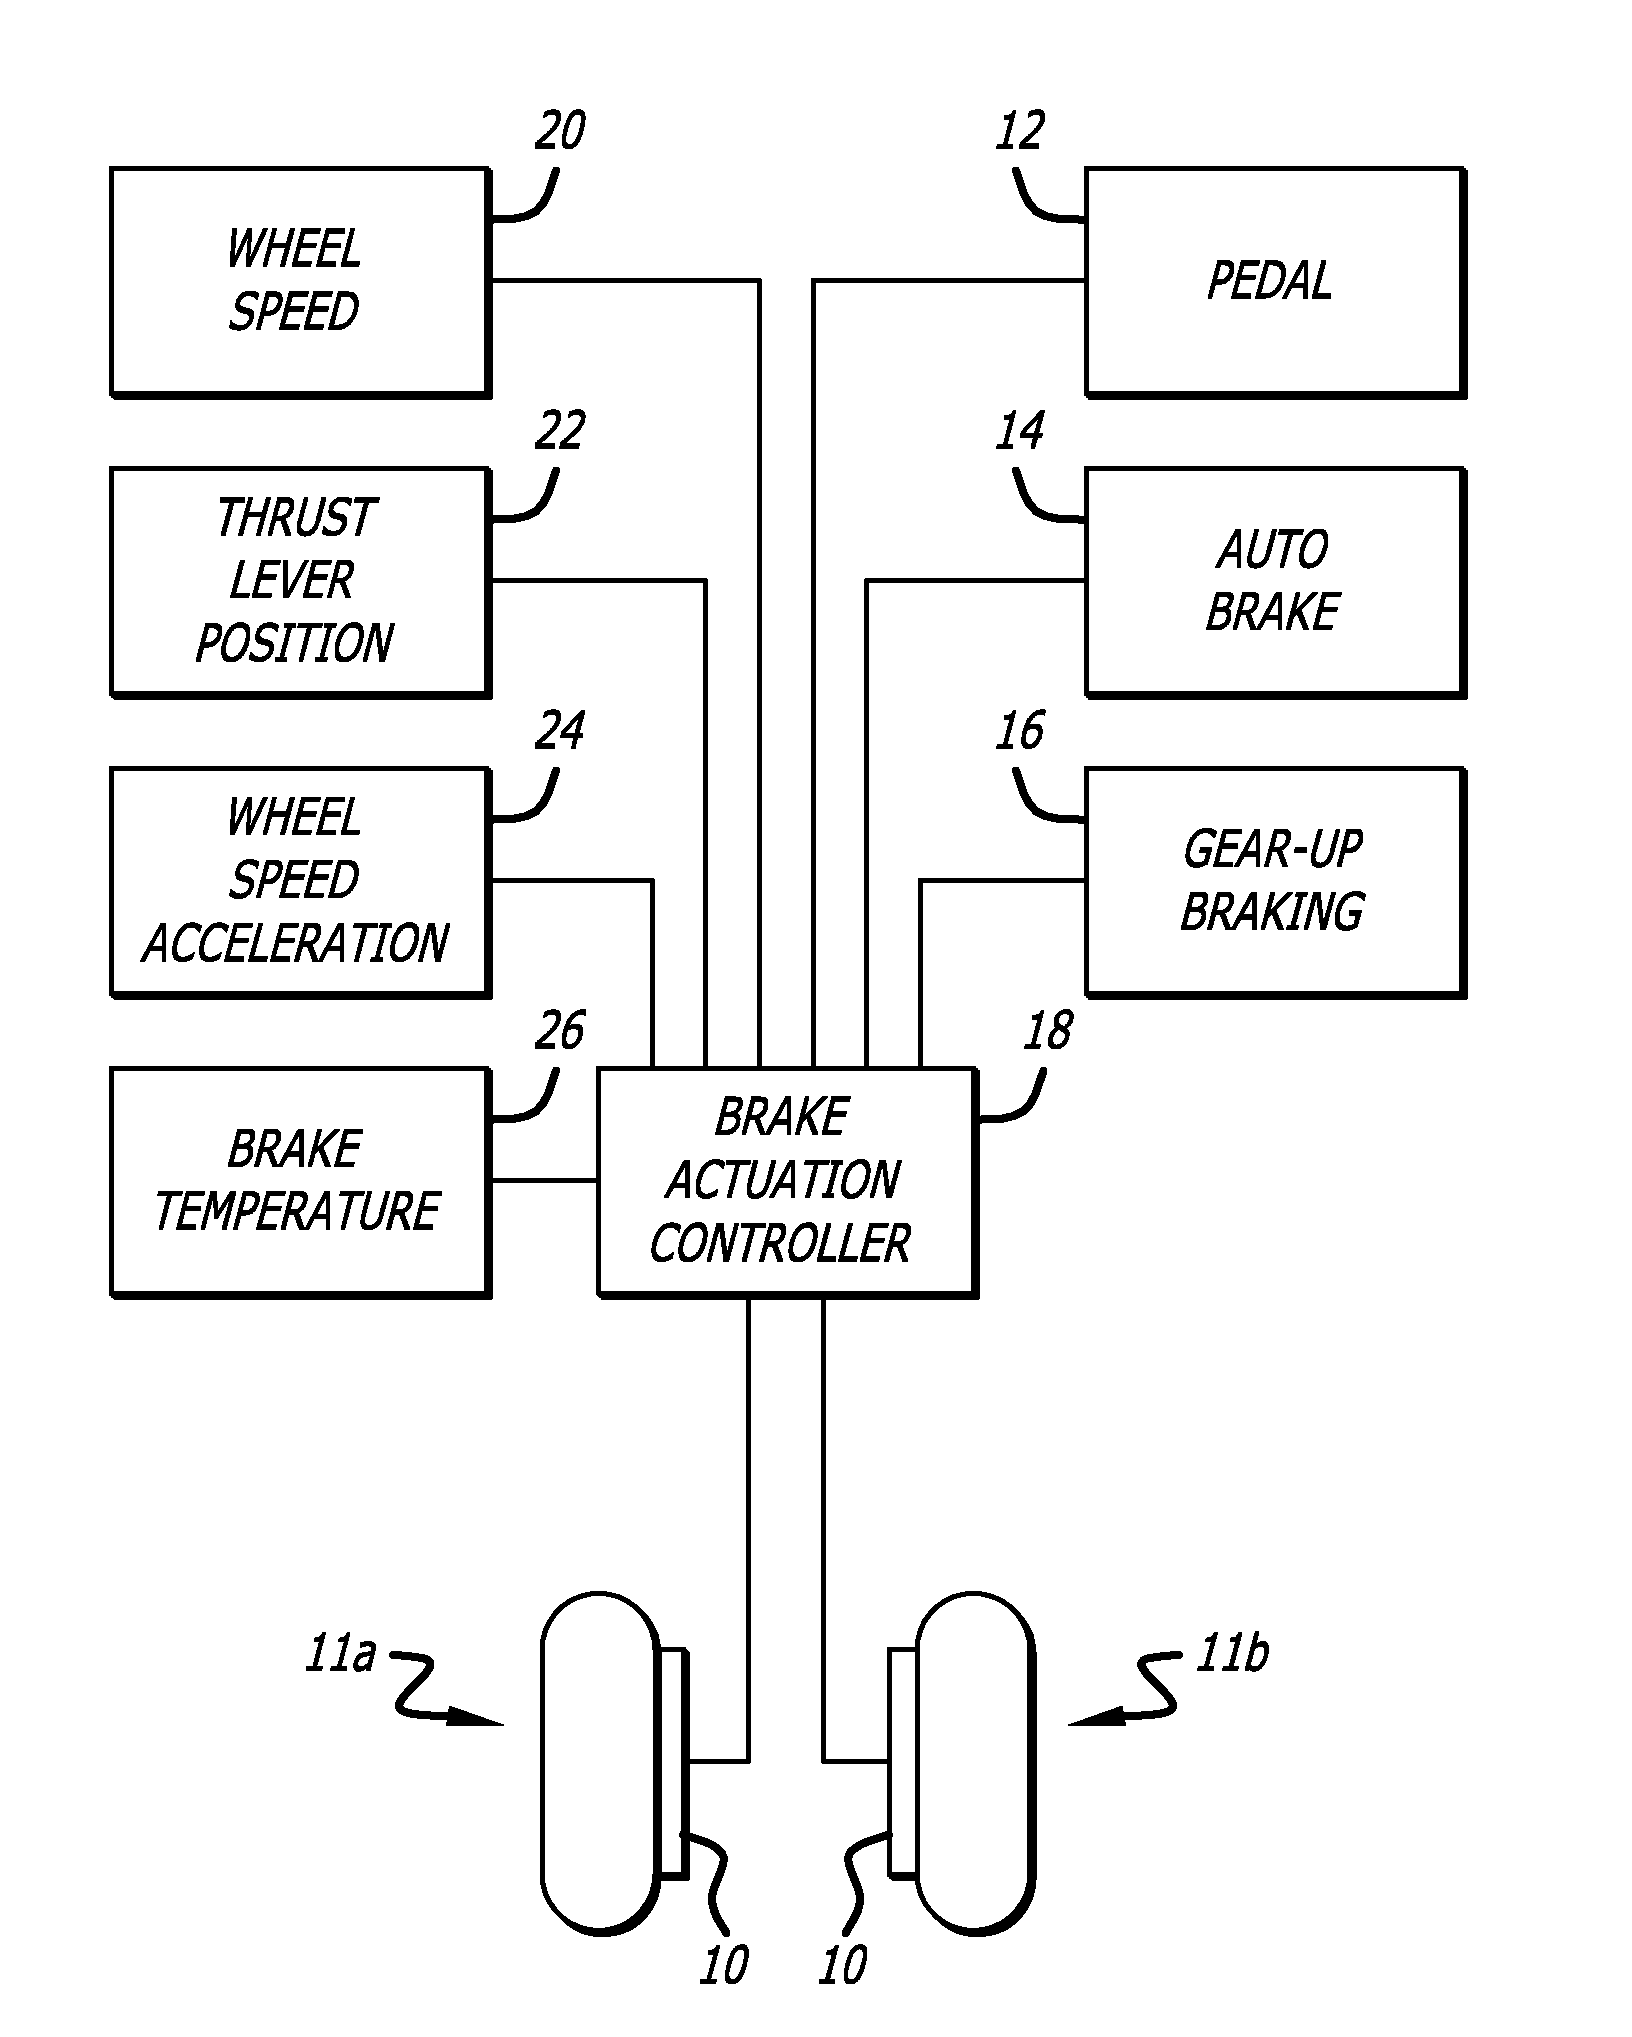 System and method for aircraft brake metering to alleviate structural loading